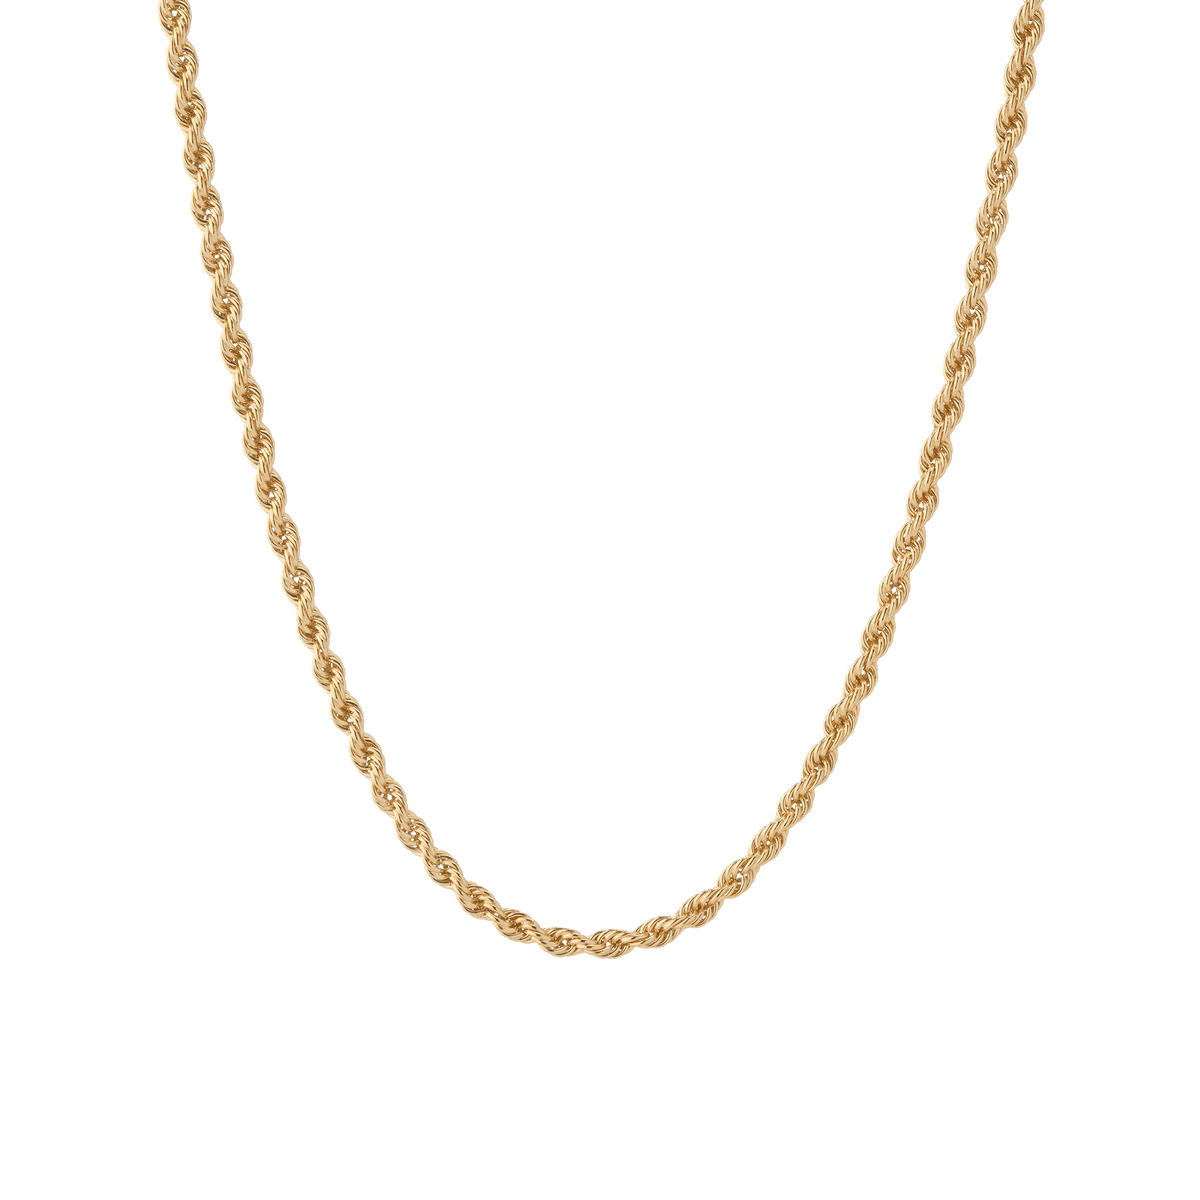 Replacement Chain, Chain Necklace, Simple Chain Necklace, Chain Necklace 